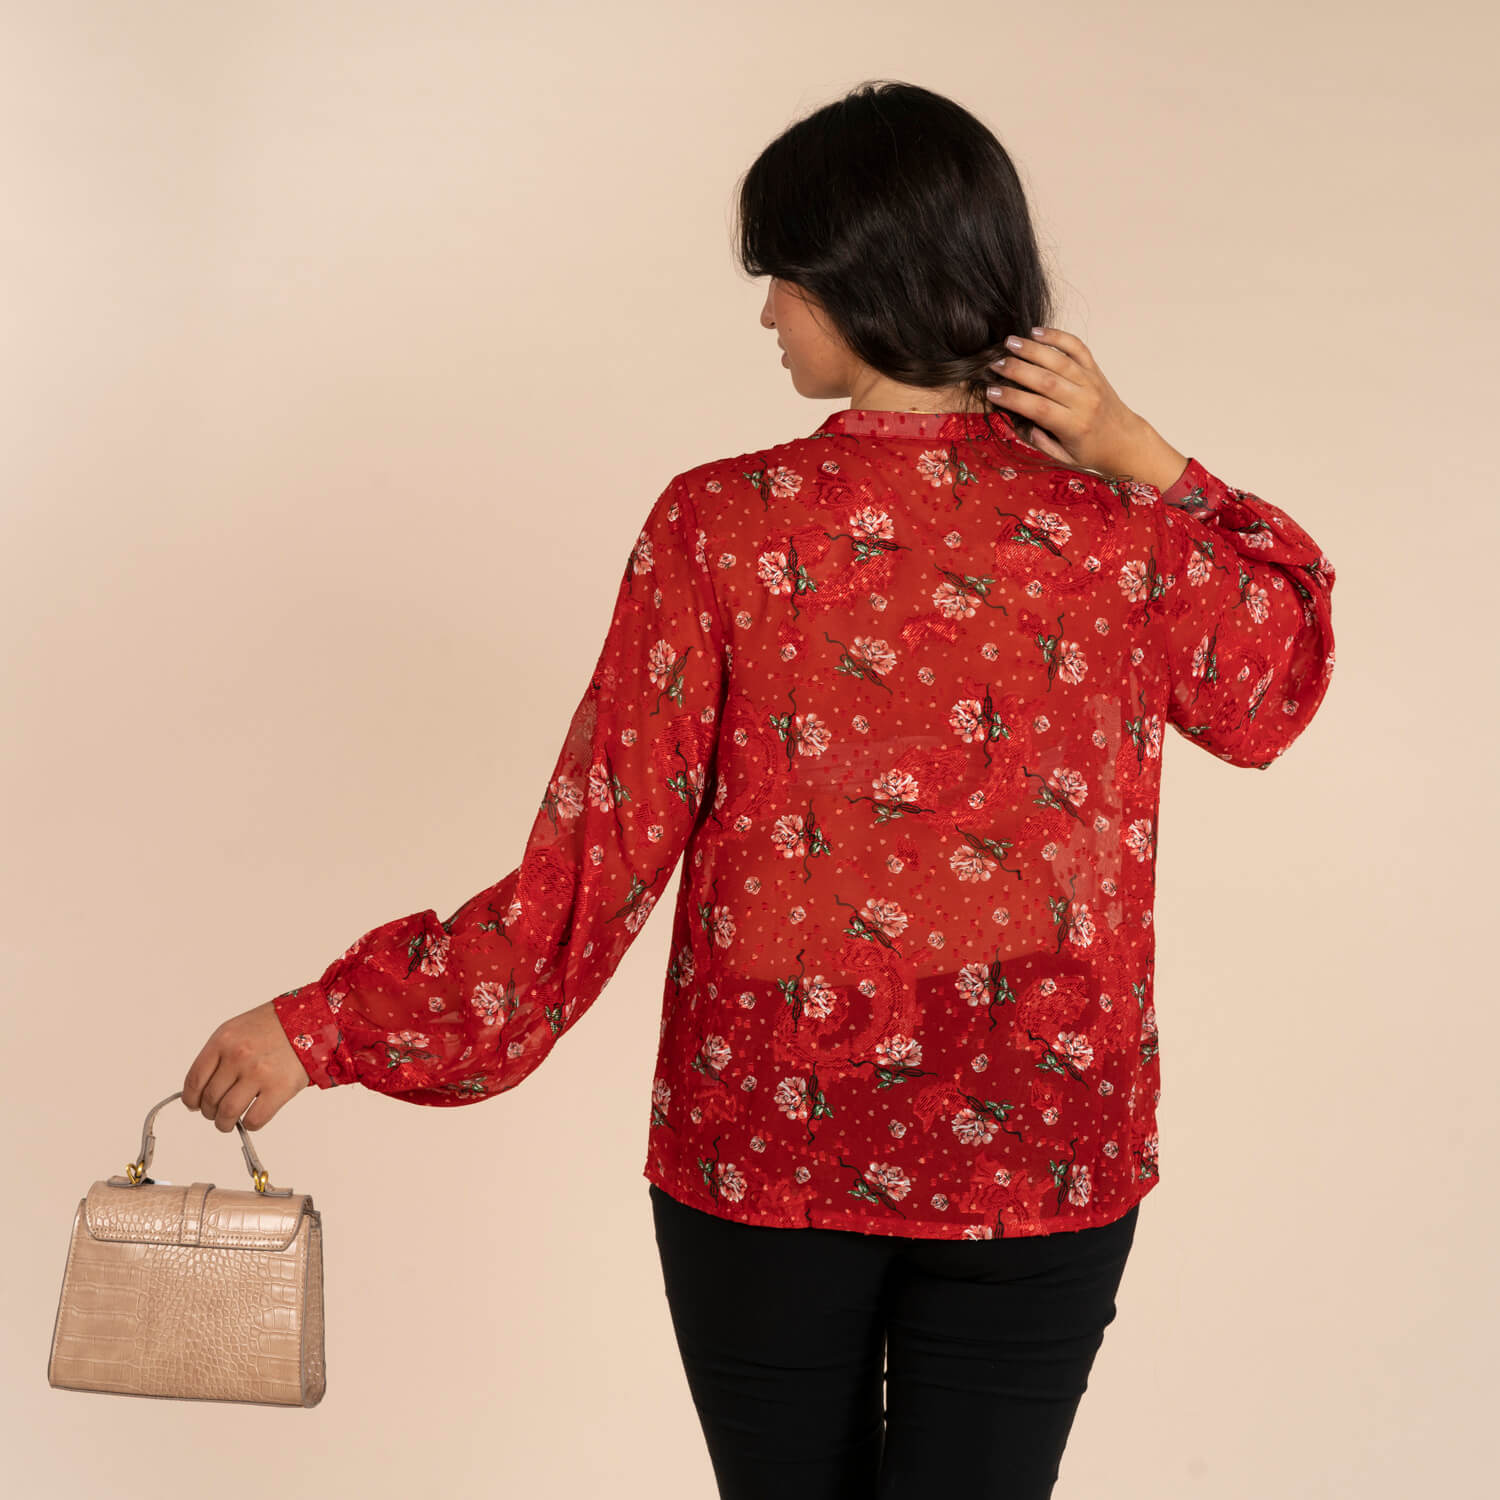 Naoise Pleat Neck Blouse - Red 2 Shaws Department Stores